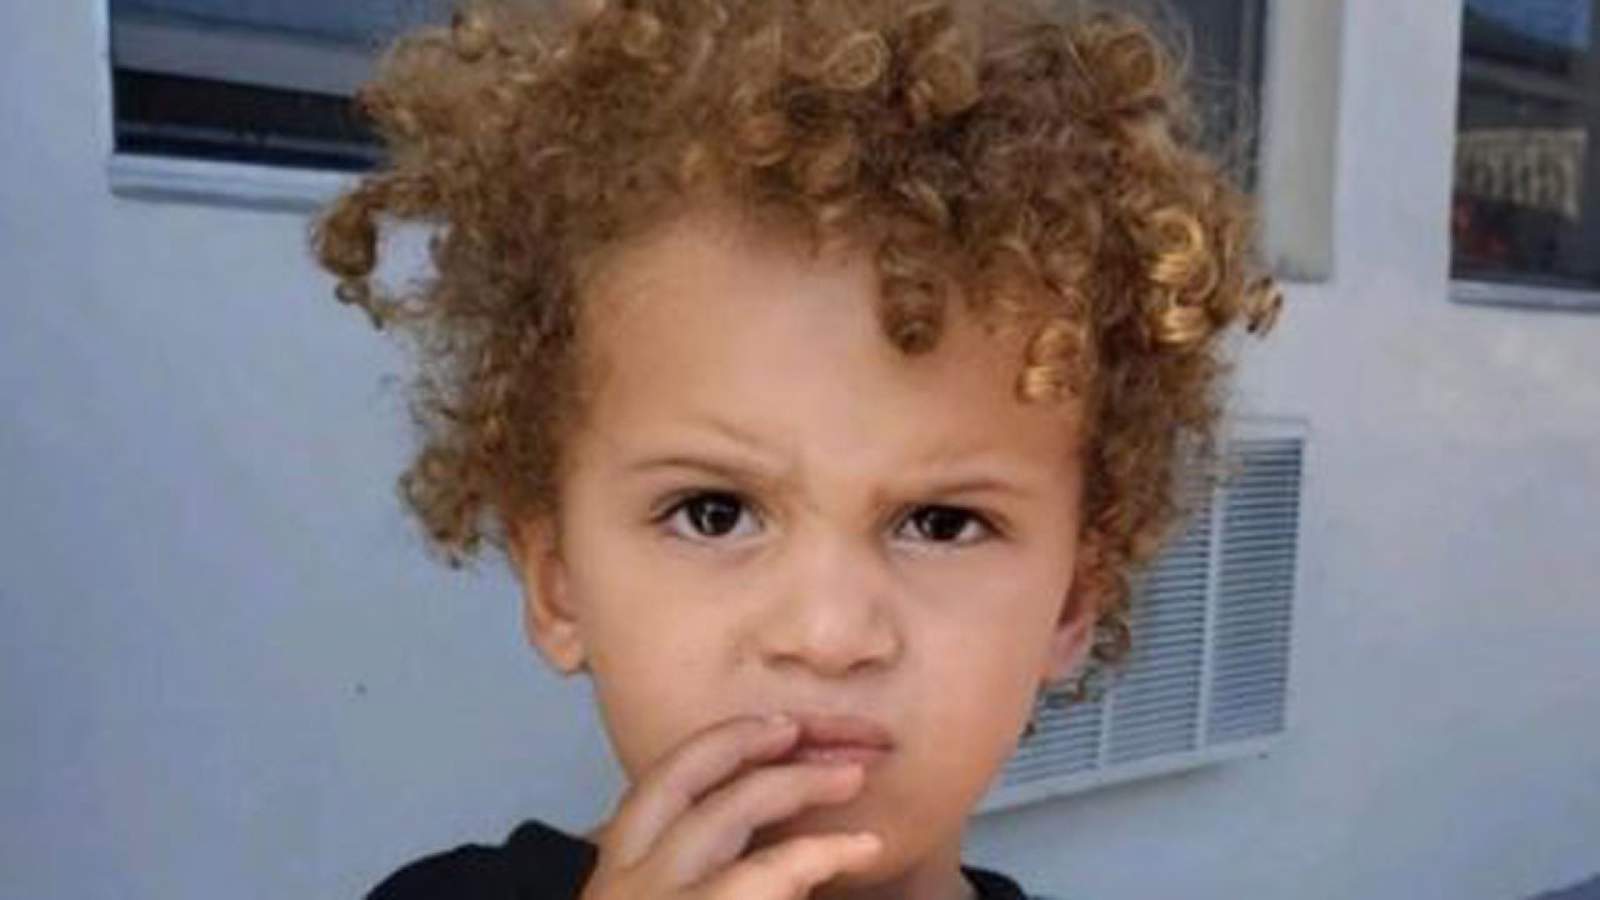 Officers ask public for help finding parents of barefoot boy found alone in Broward